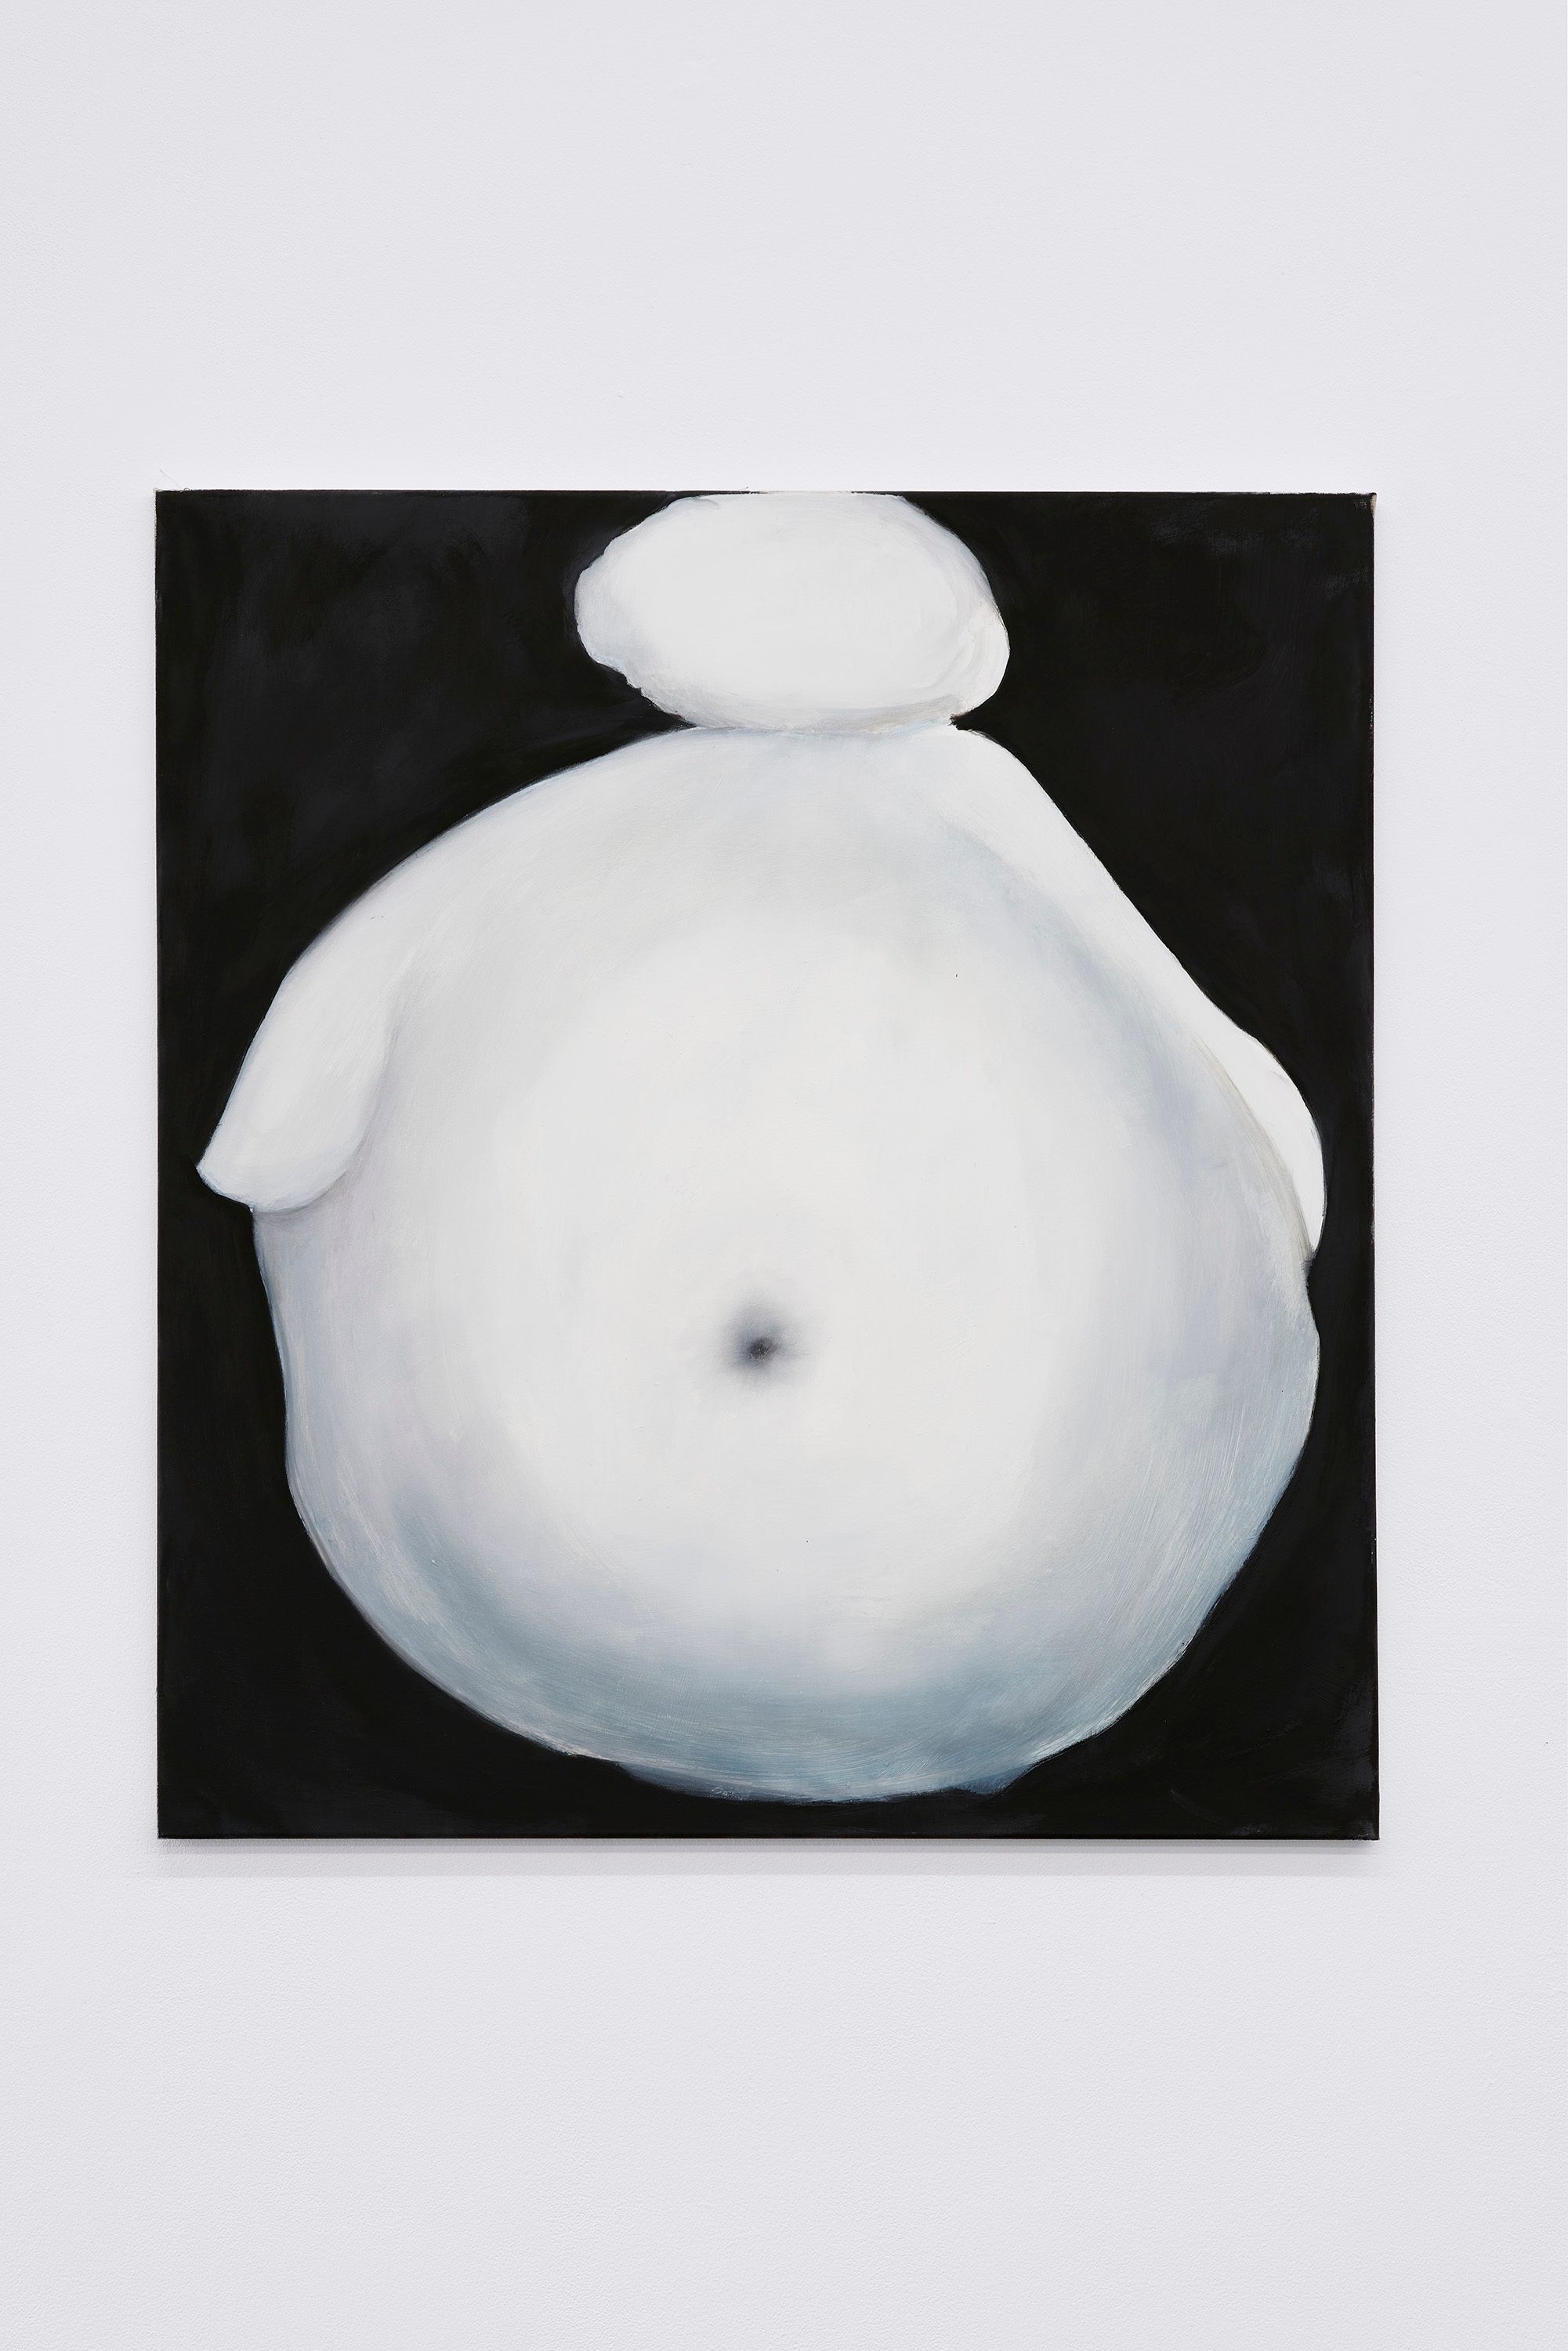 Eric Sidner, Chiqui-baby, 2018, Oil on canvas, 100 ⁠× ⁠90 ⁠⁠cm